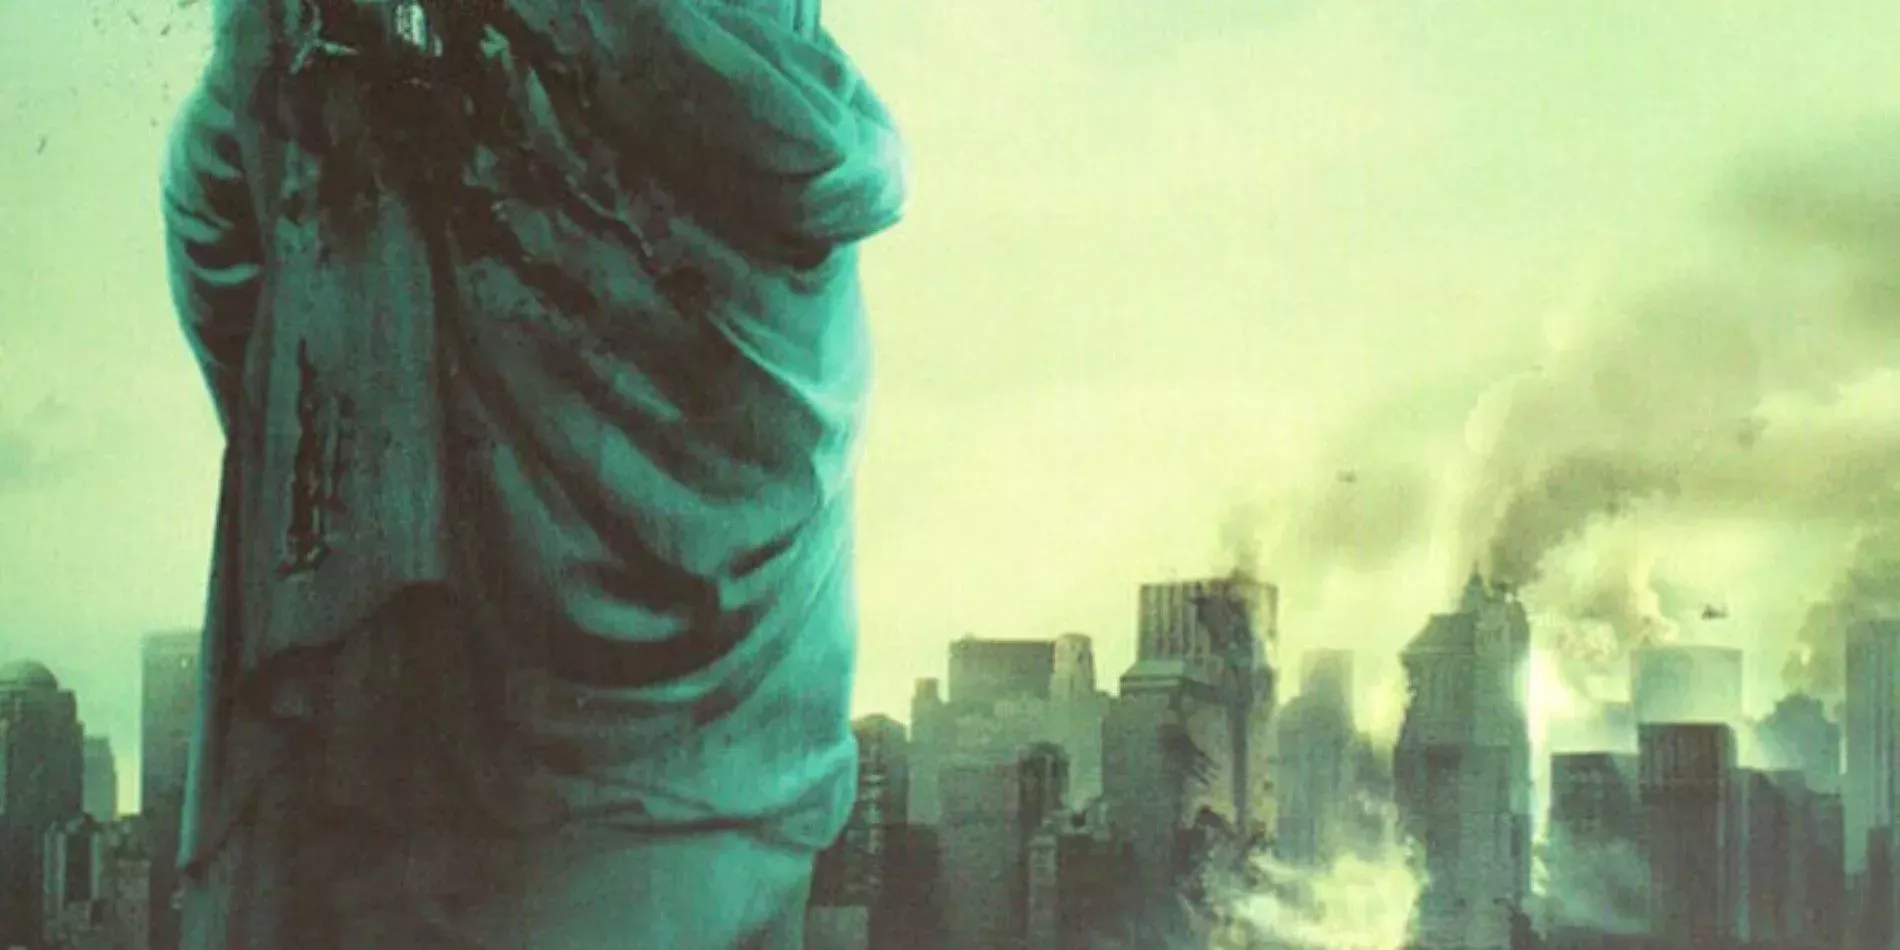 Cloverfield/Kishin cover, showing a manga version of the Cloverfield movie poster